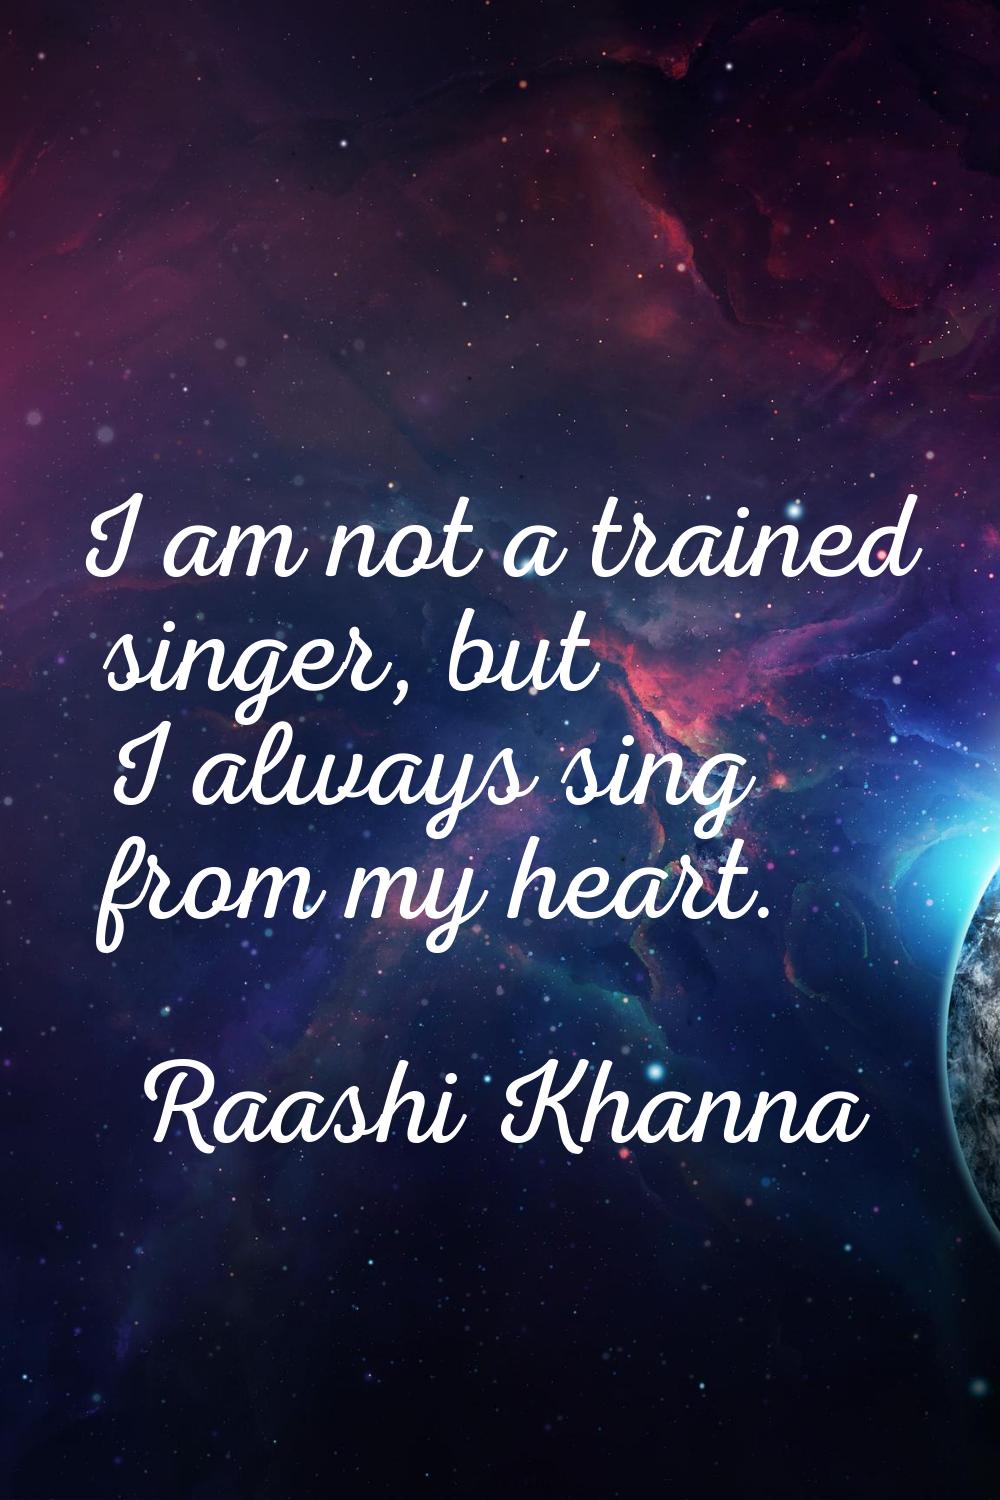 I am not a trained singer, but I always sing from my heart.